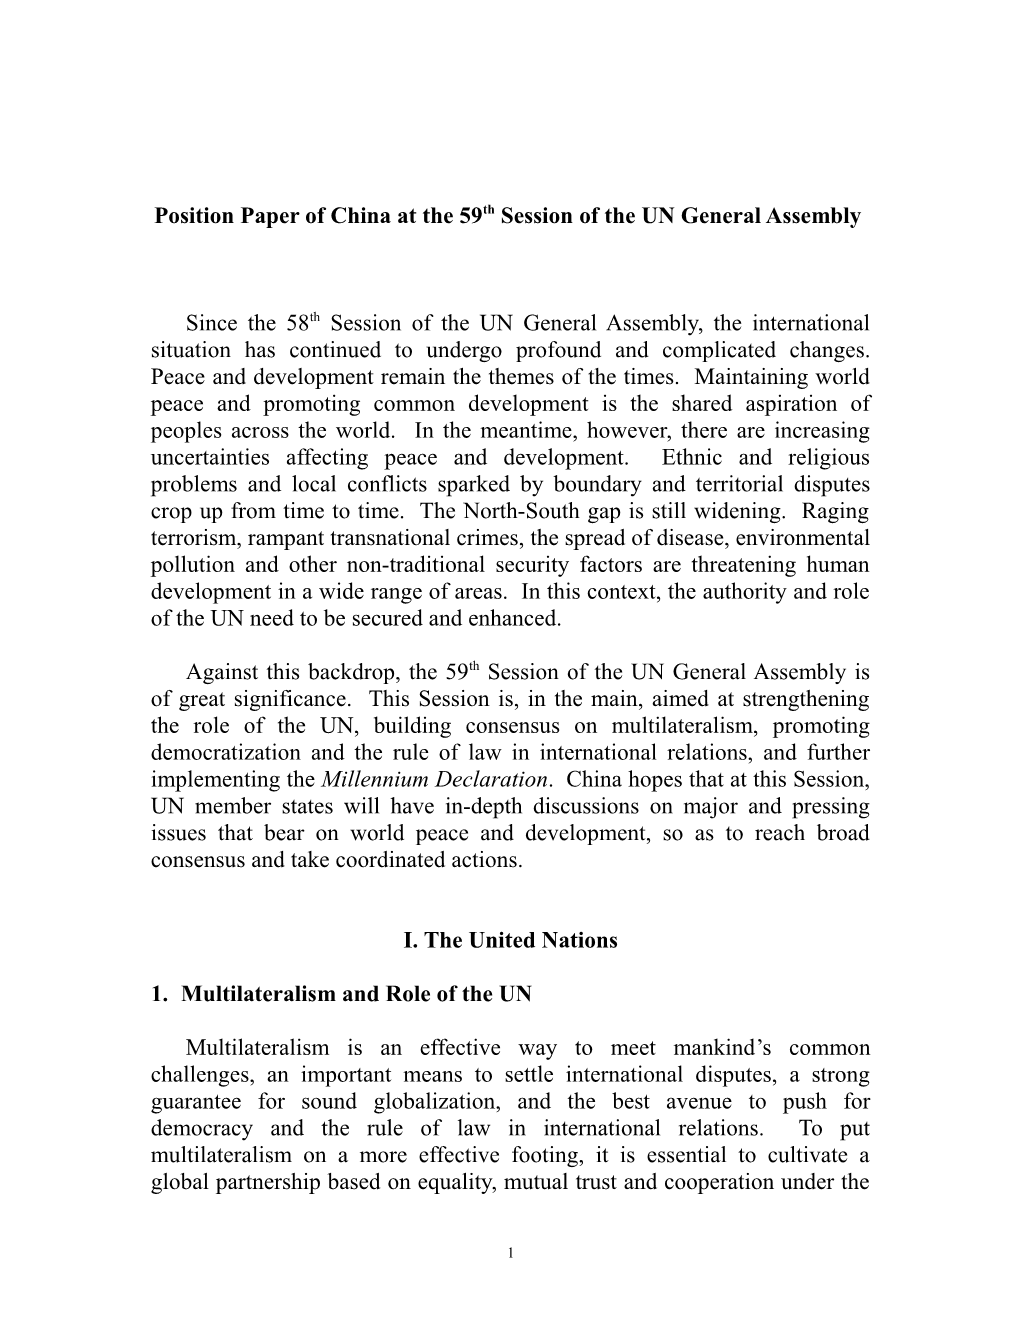 Fifth on Non-Proliferation, Arms Control and Disarmament